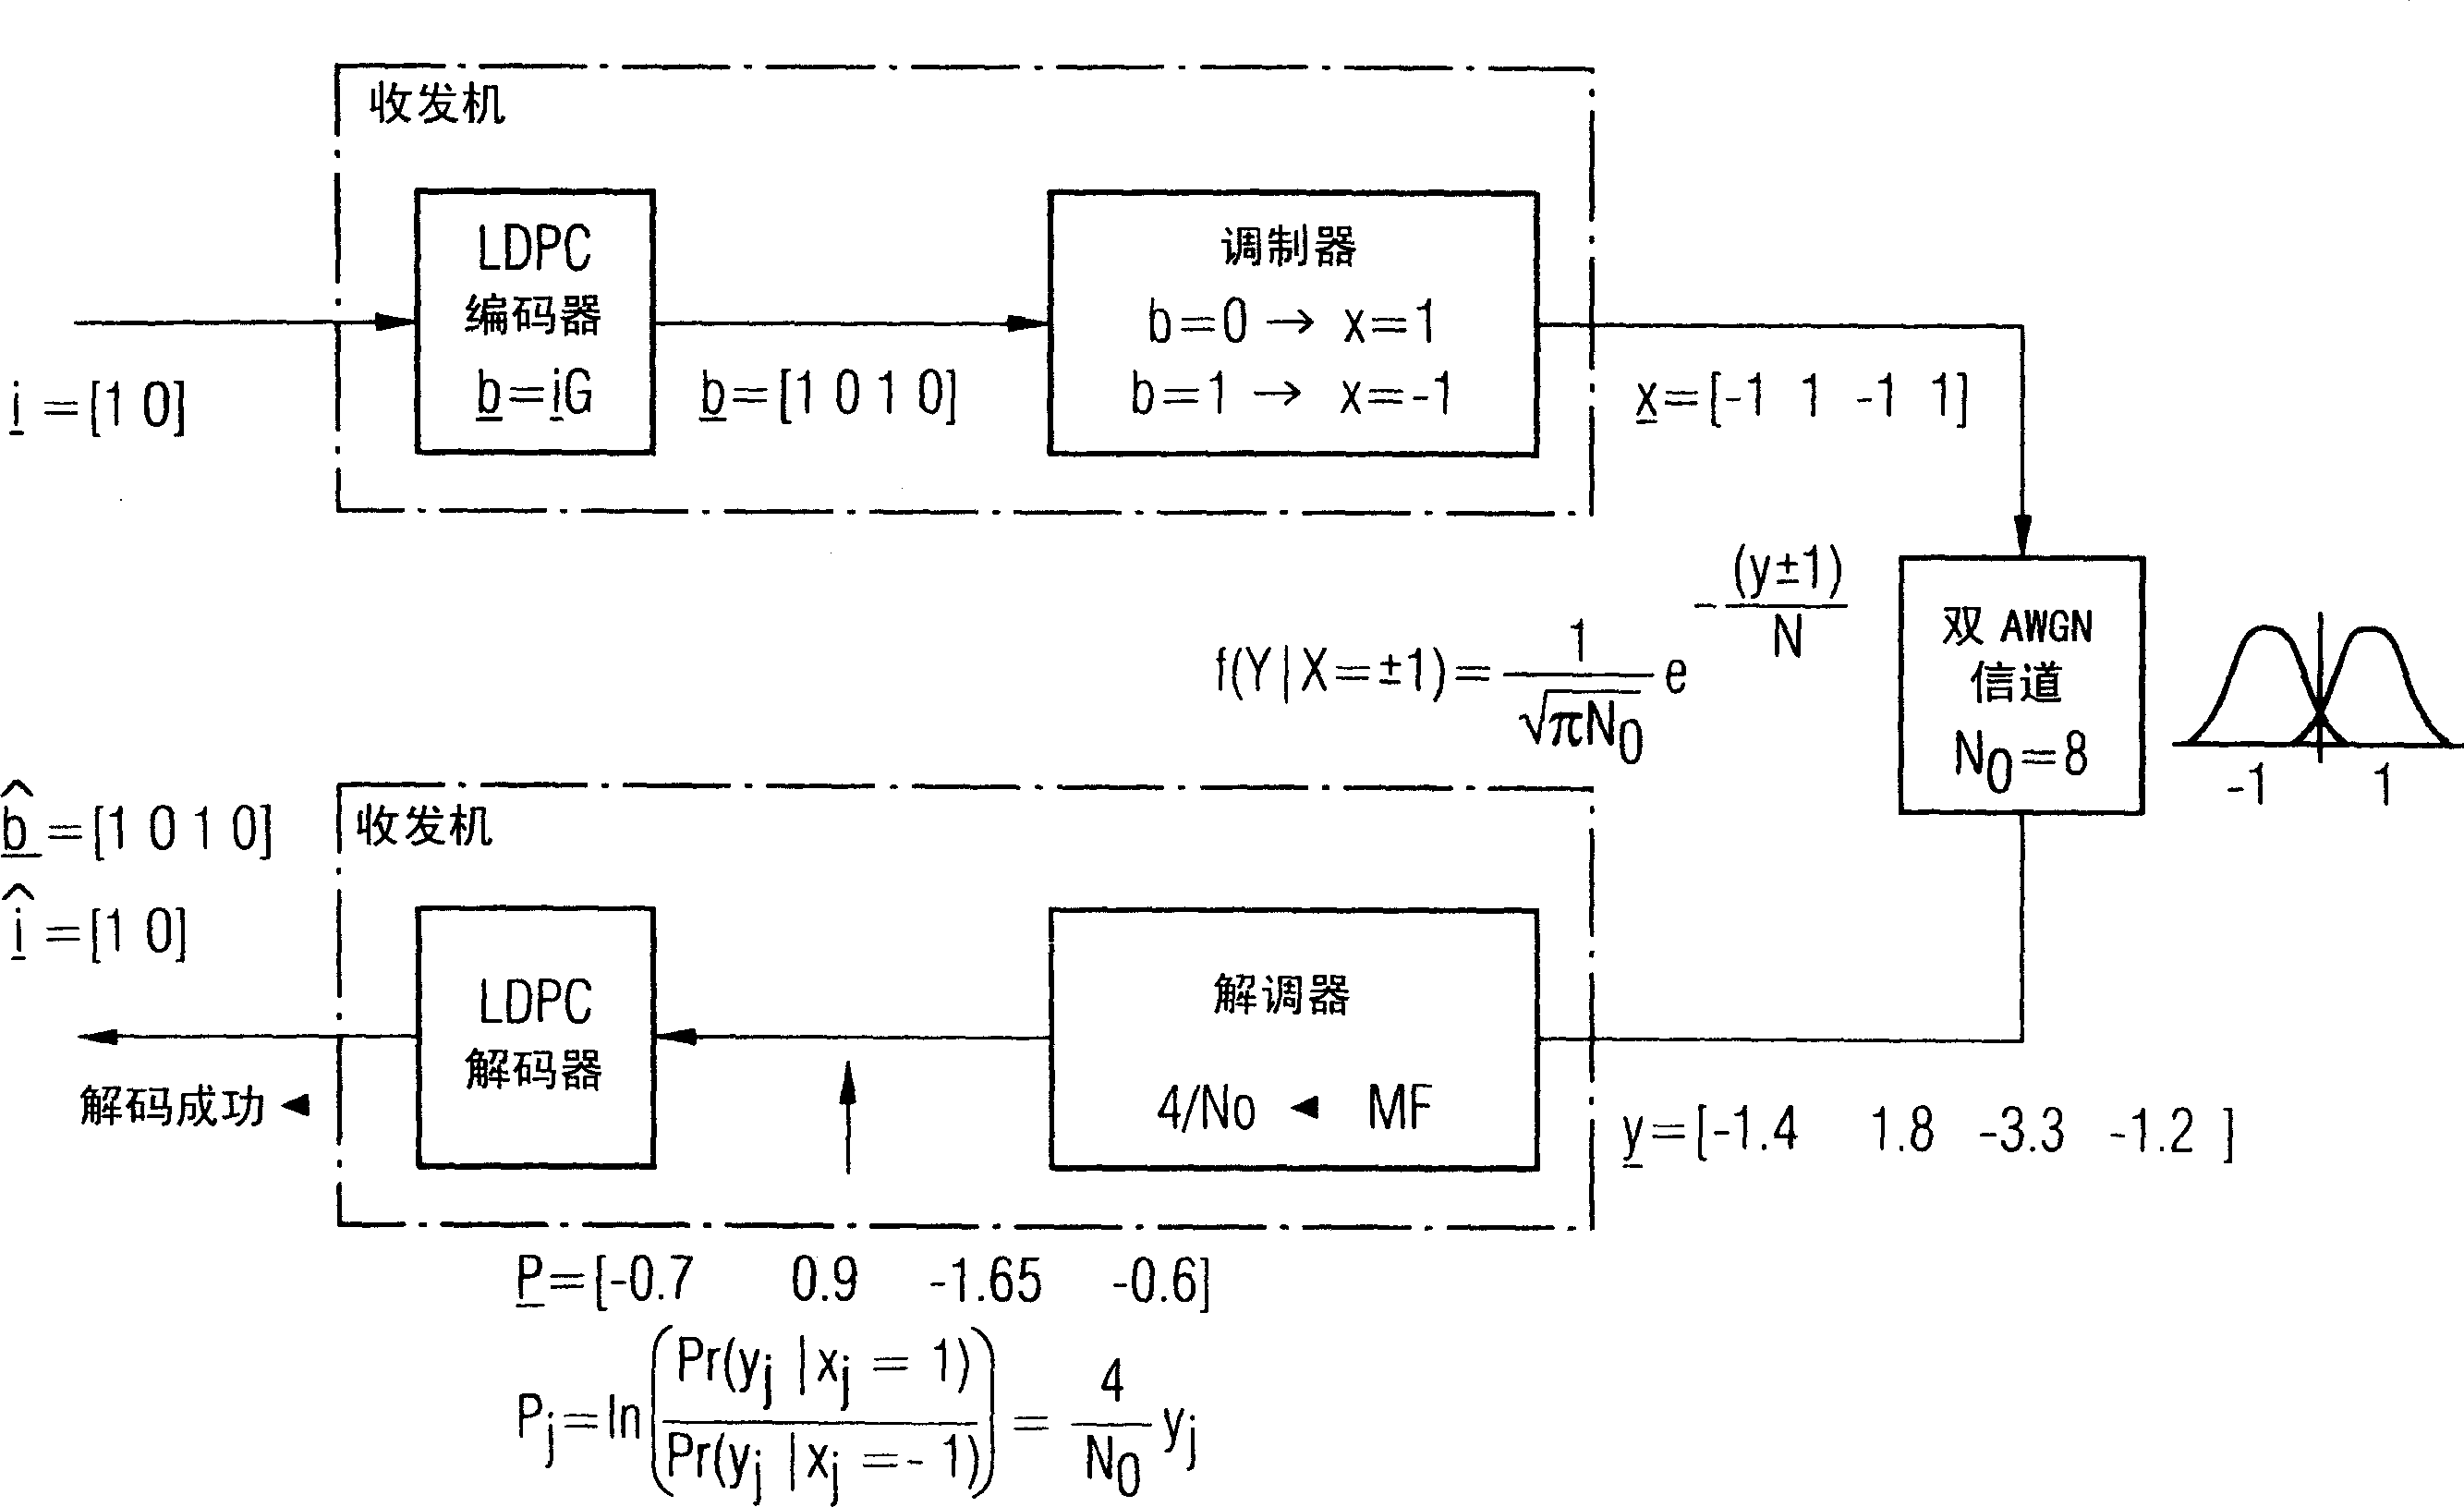 LDPC decoder for decoding a low-density parity check (LDPC) codewords